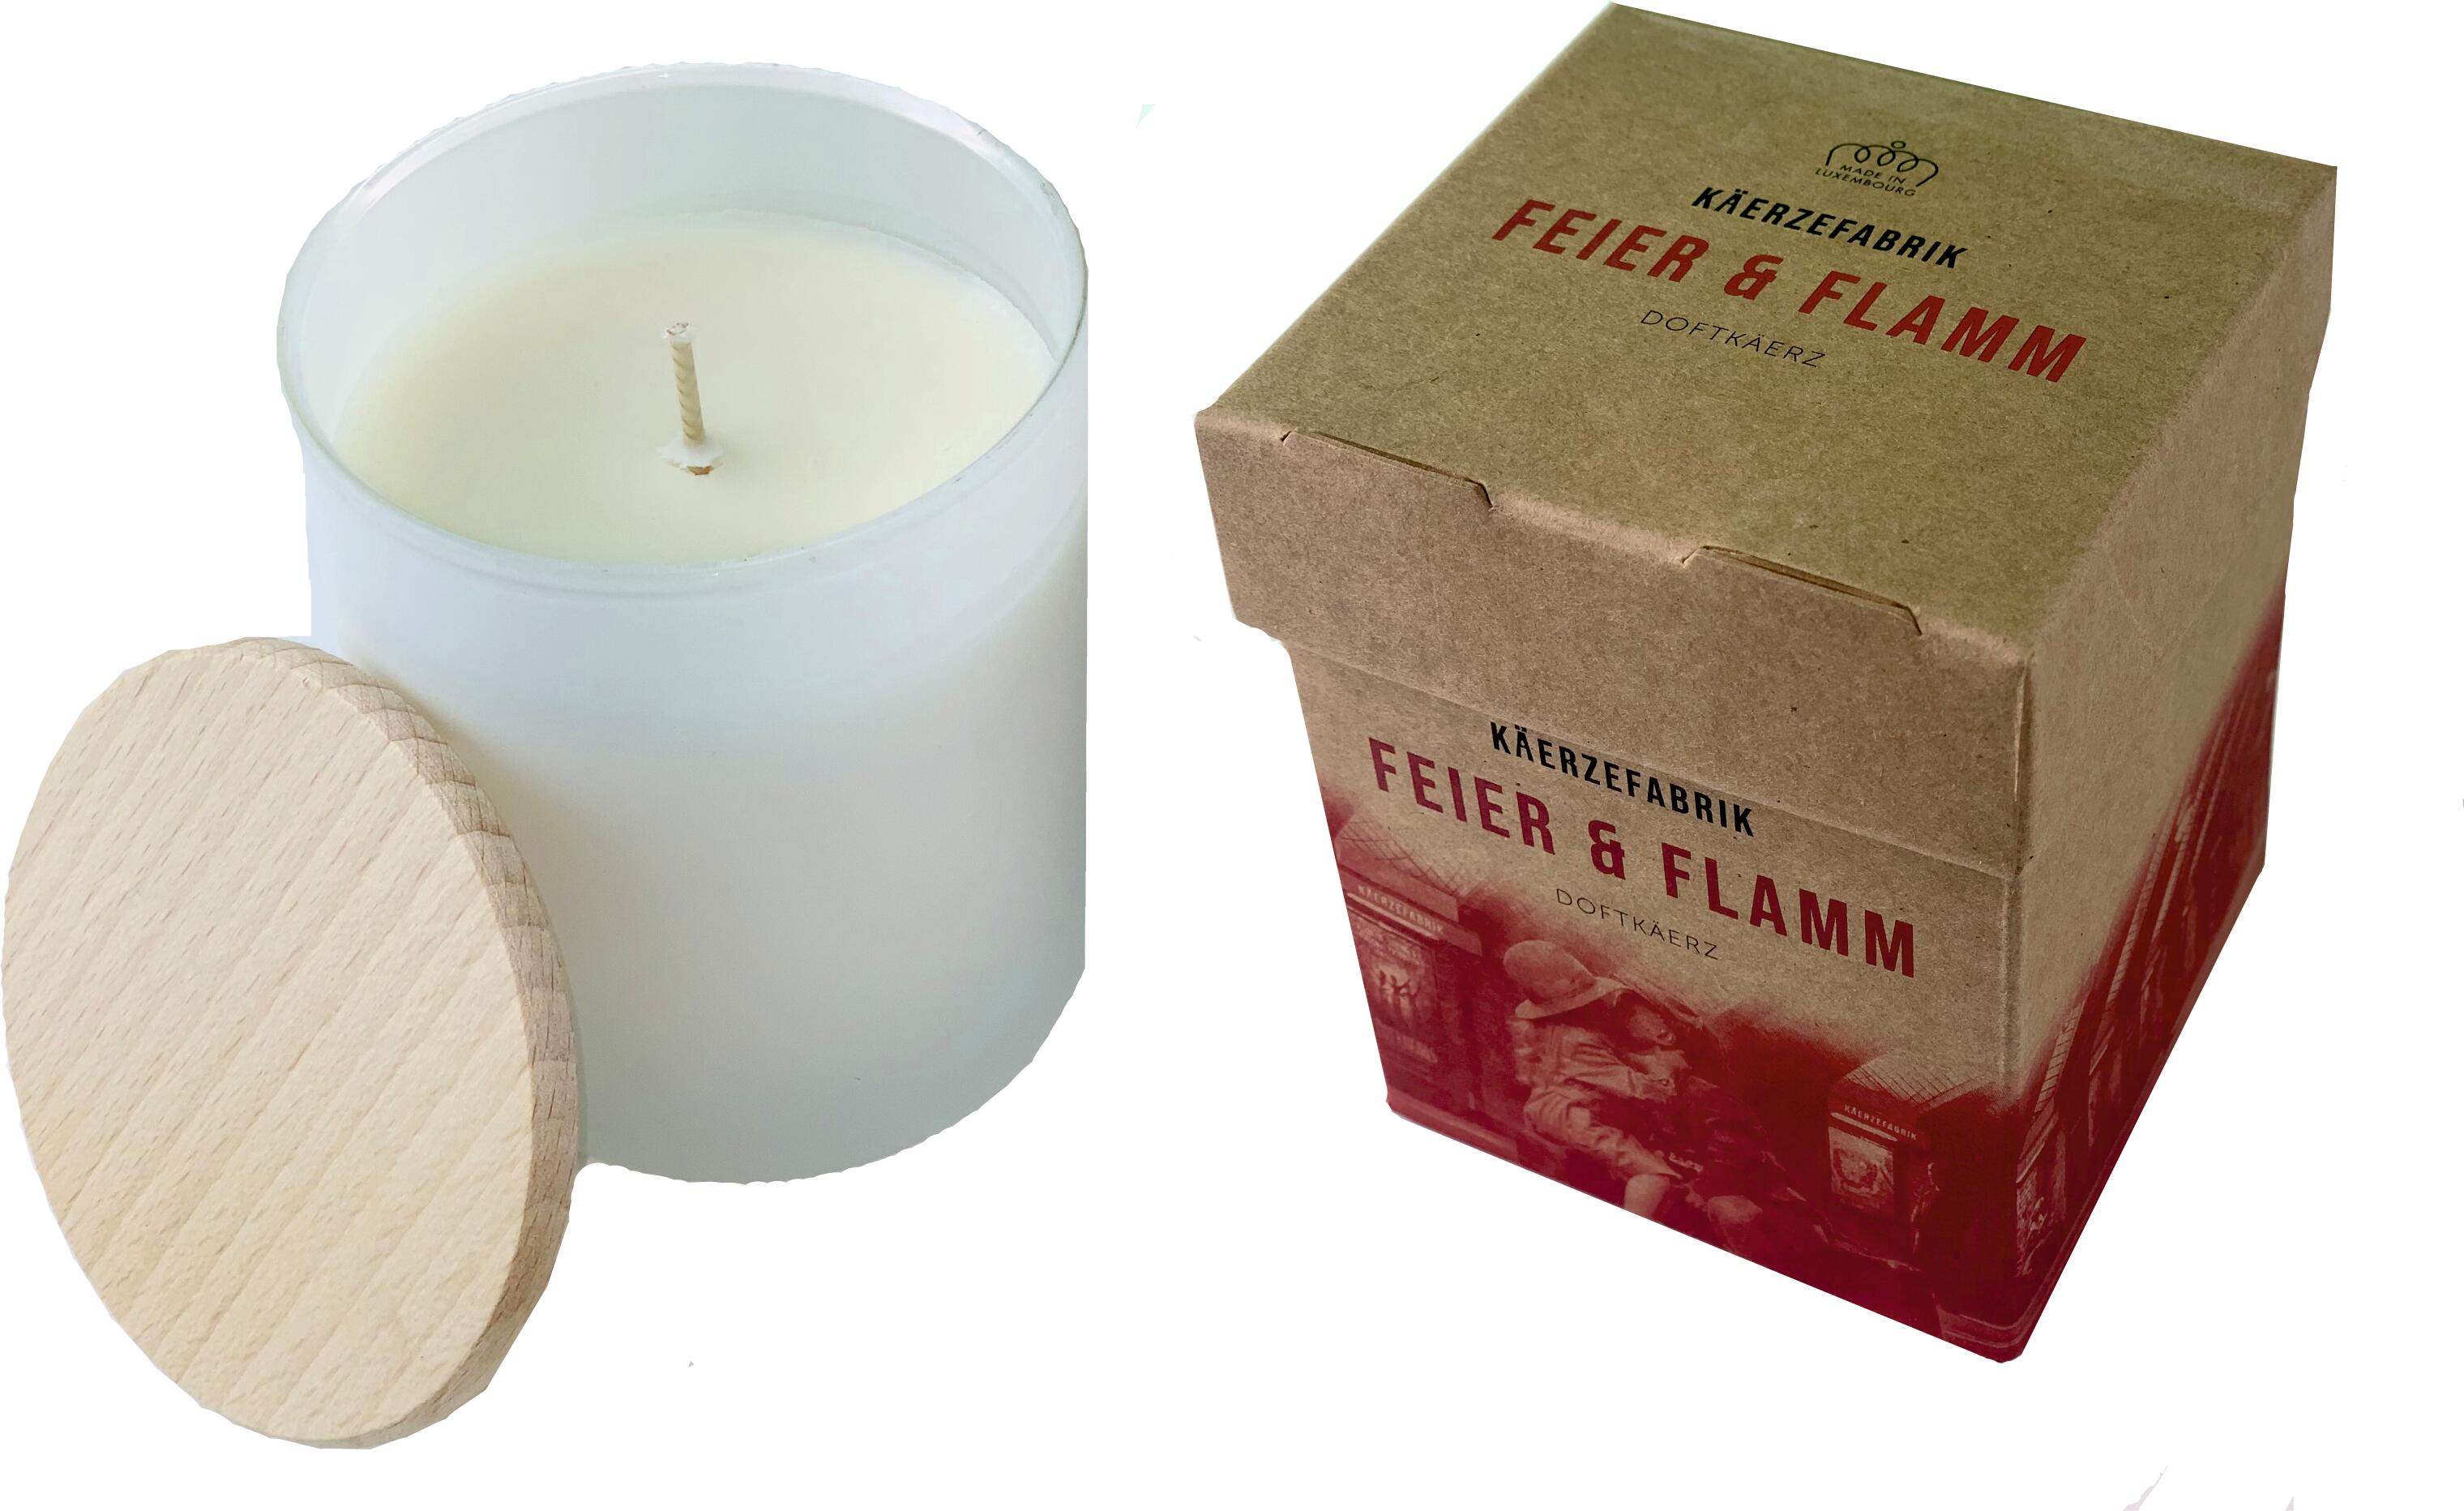 Scented candle "Celebration &amp; Flame